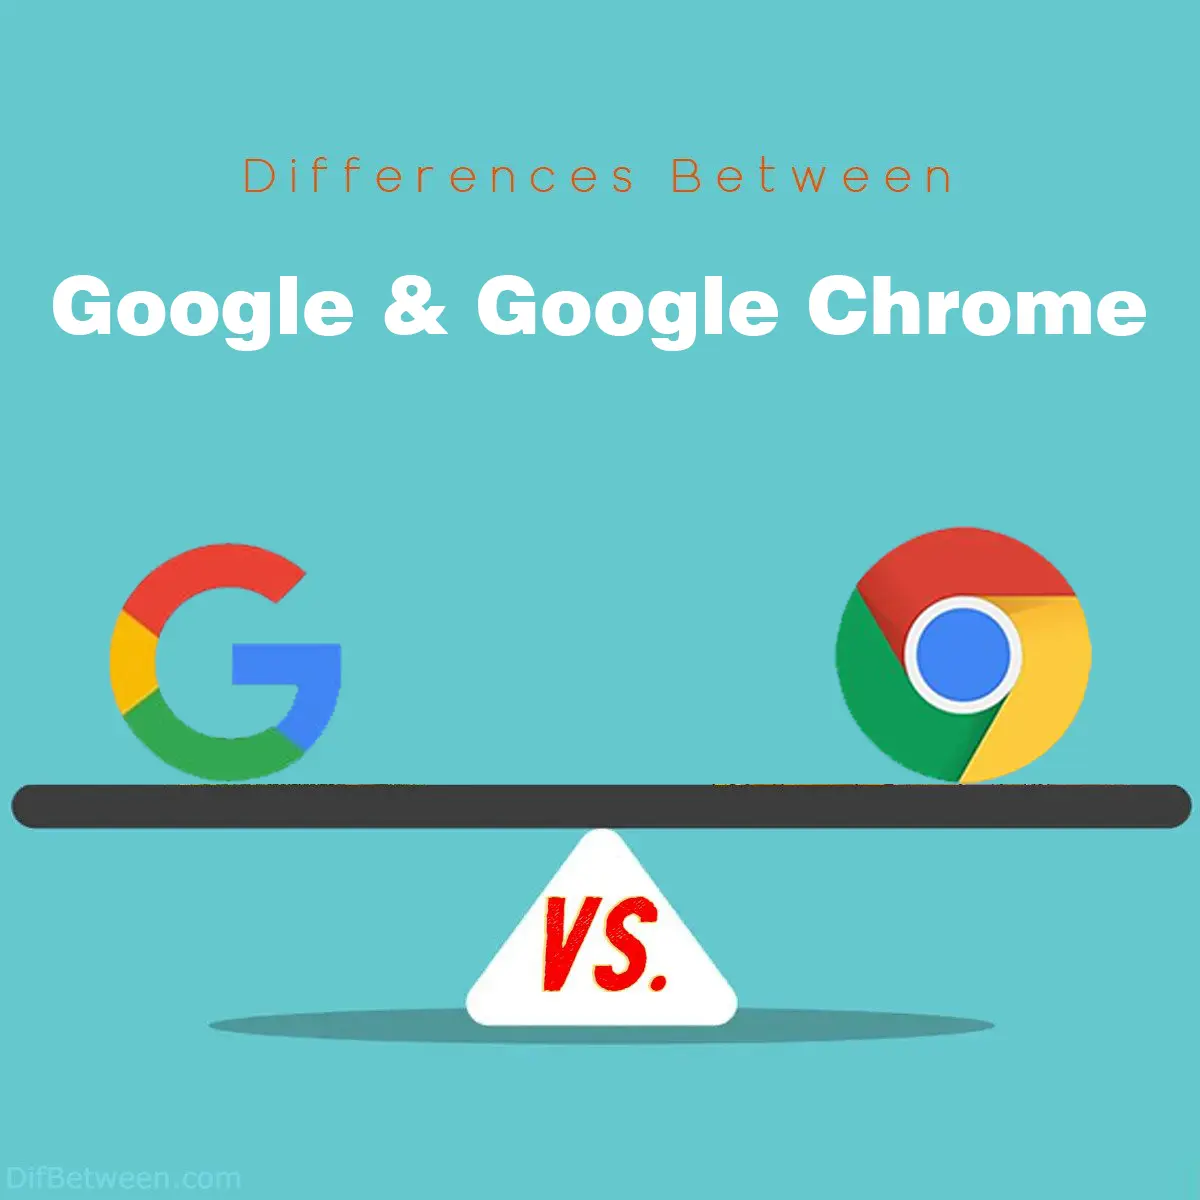 Key Differences Between Google and Google Chrome